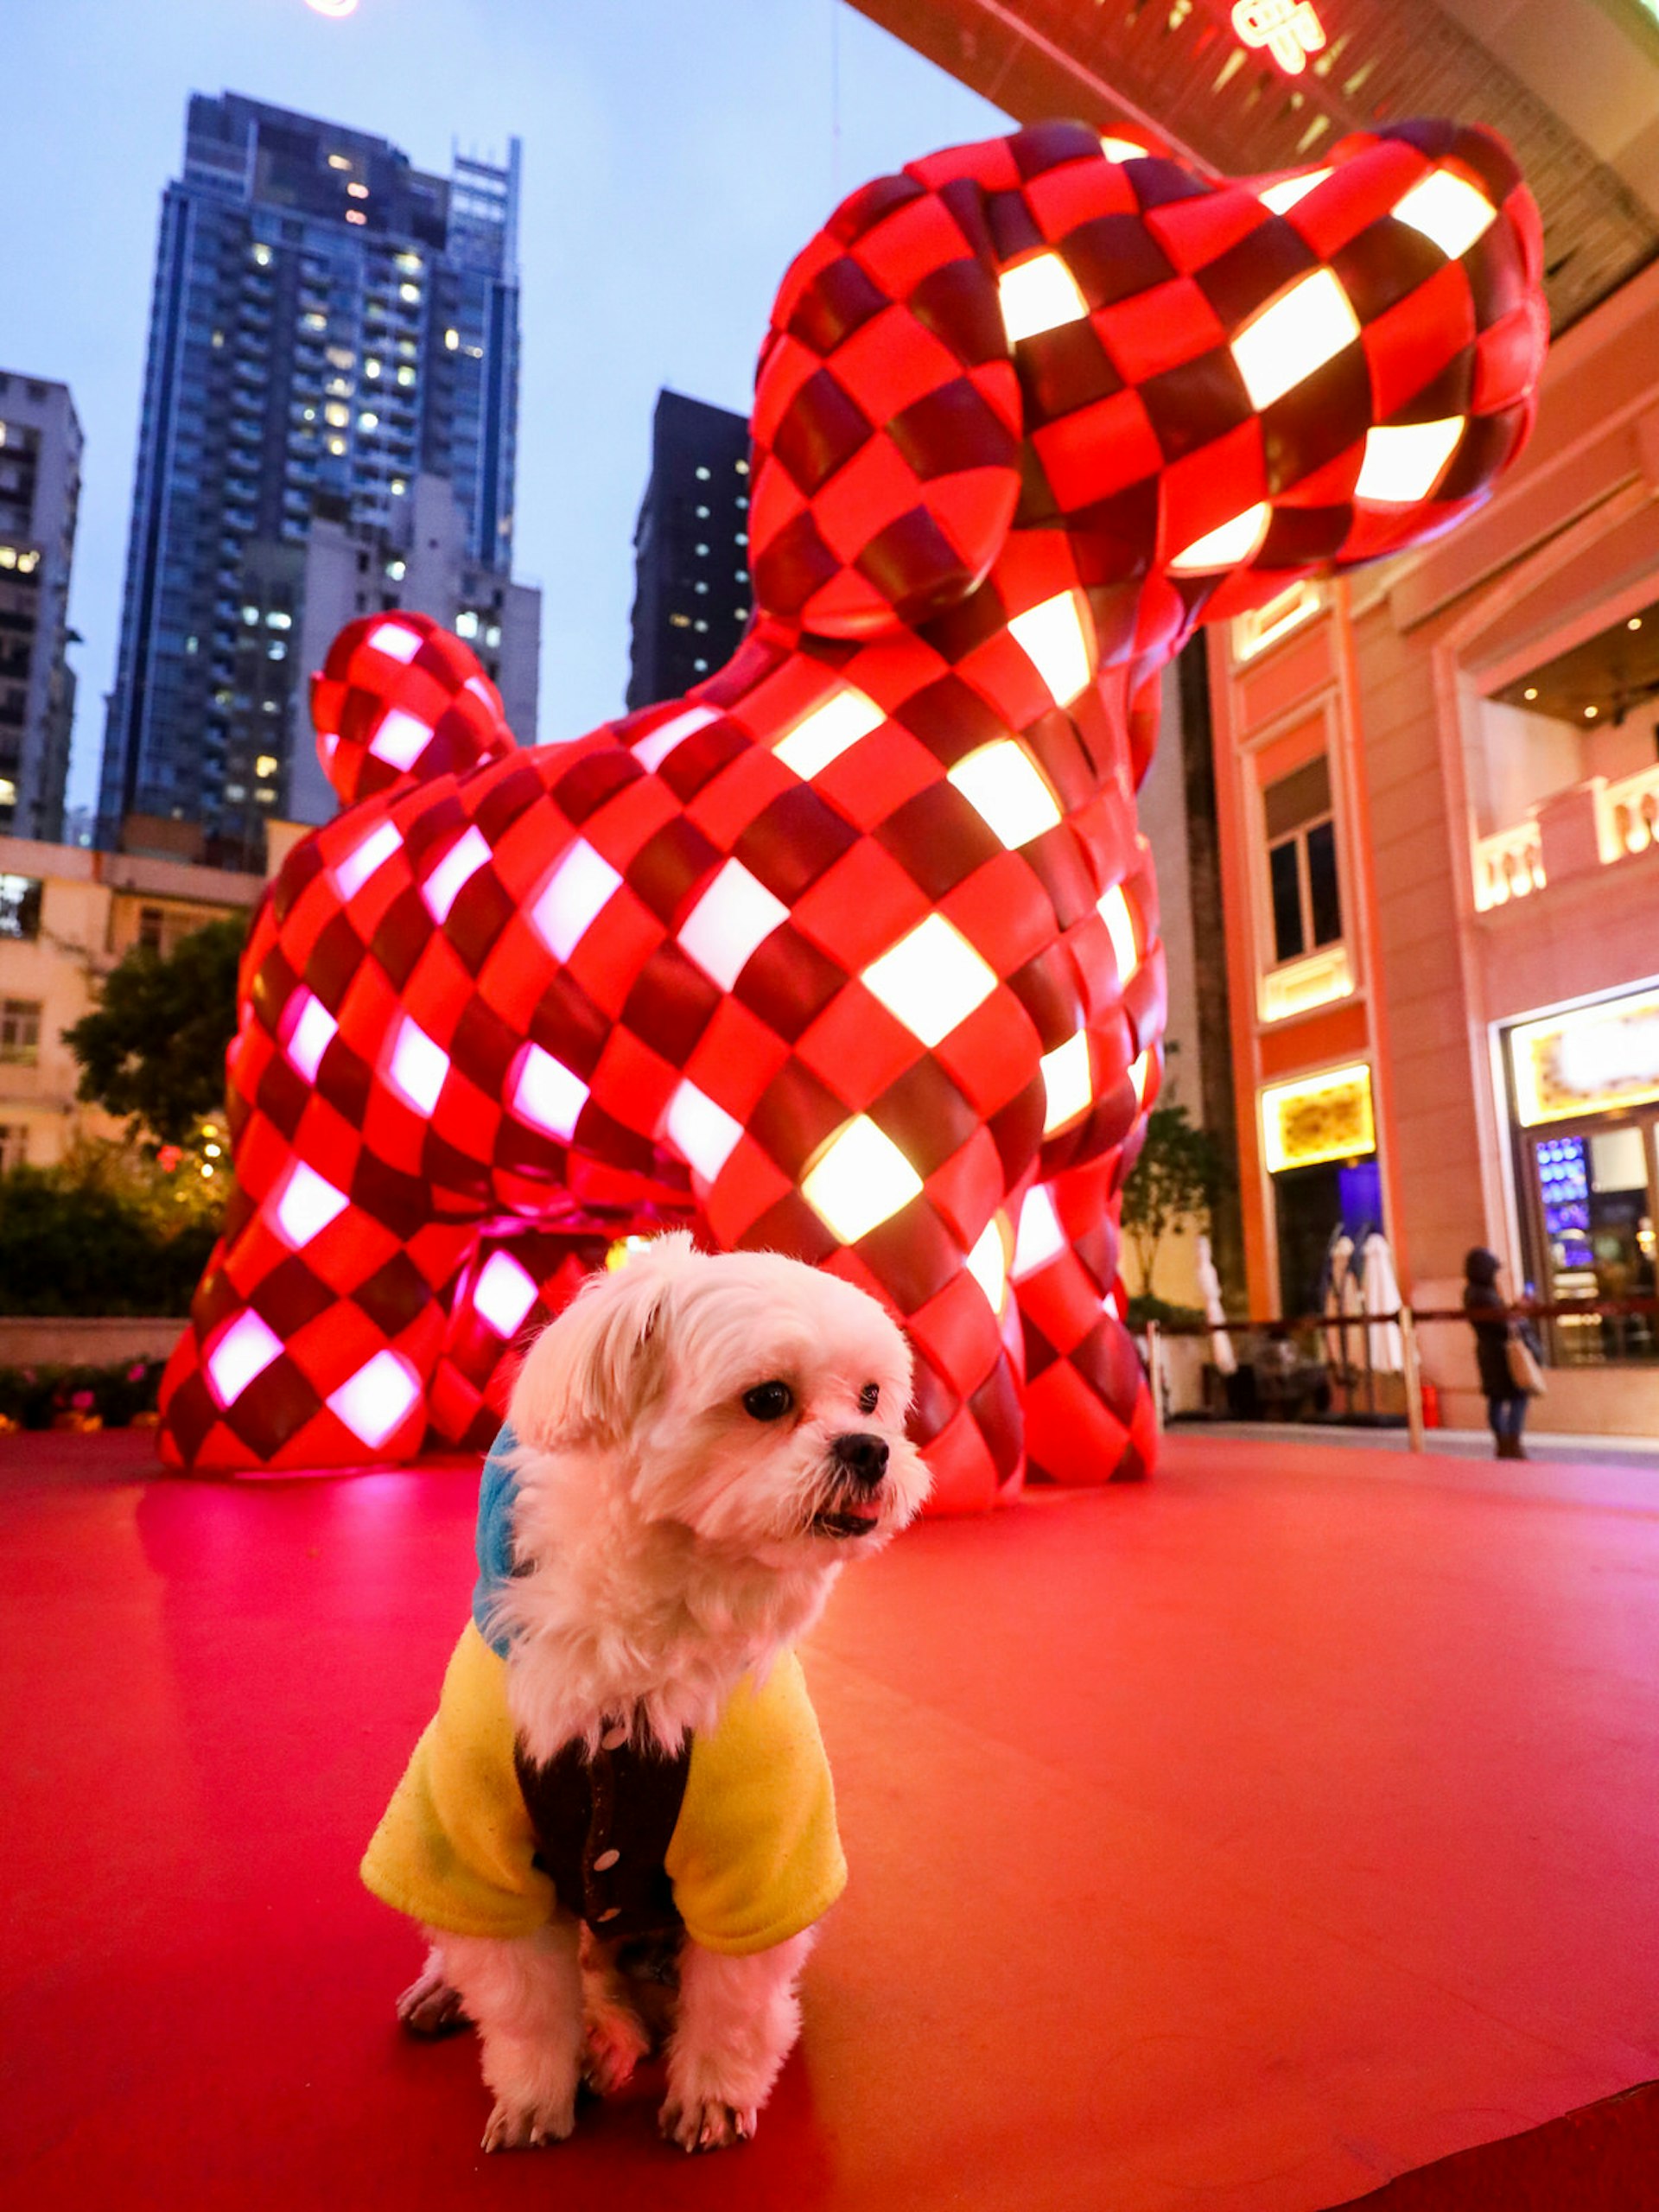 A small white dog stands in front of a giant red and white sculpture of a dog made using the traditional Chinese art of knotting © Lee Tung Avenue